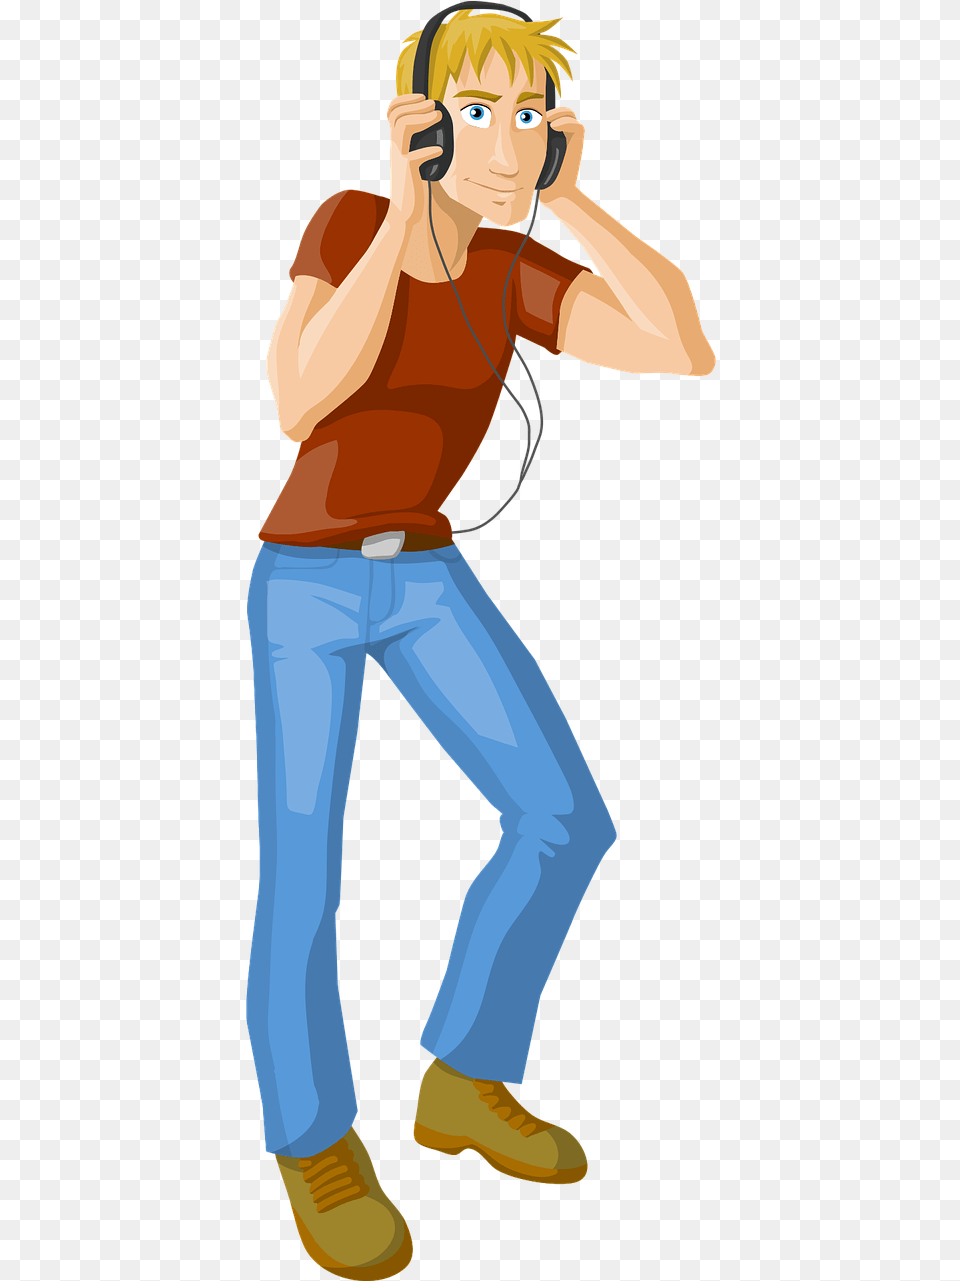 Cartoon Man With Earphone, Clothing, Photography, Pants, Adult Png Image